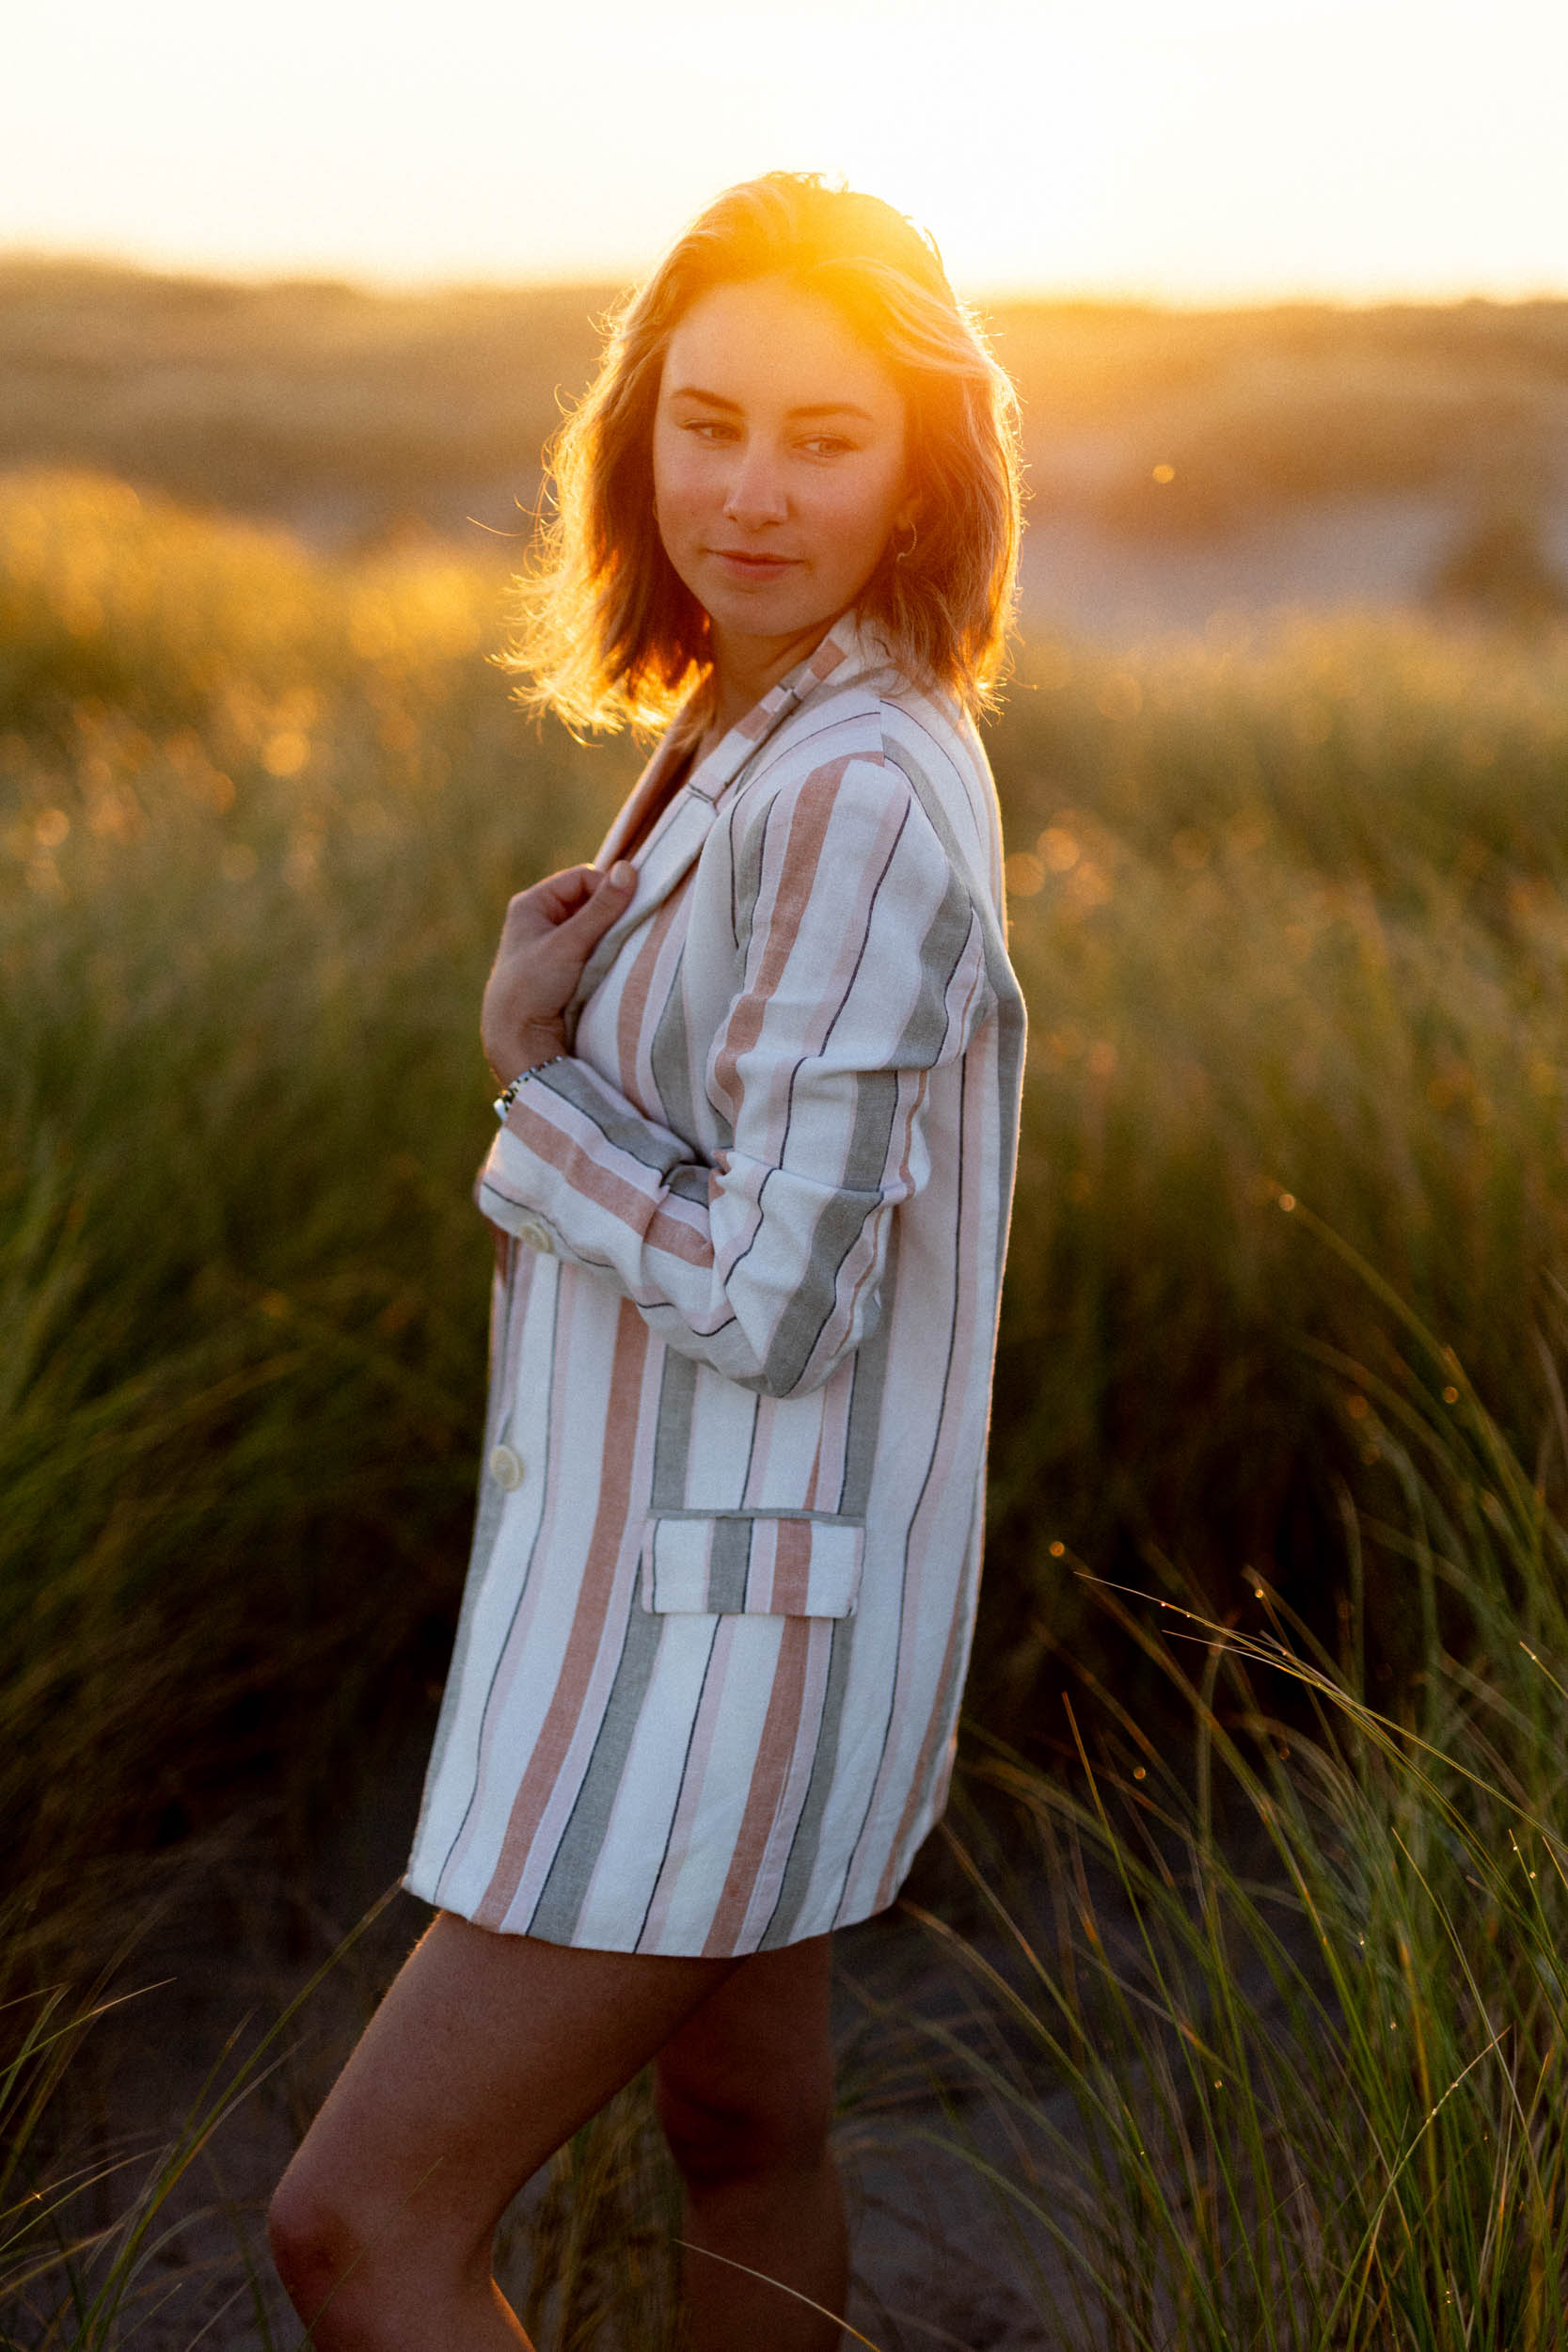 A woman in a striped blazer poses for beach photos in tall grass.